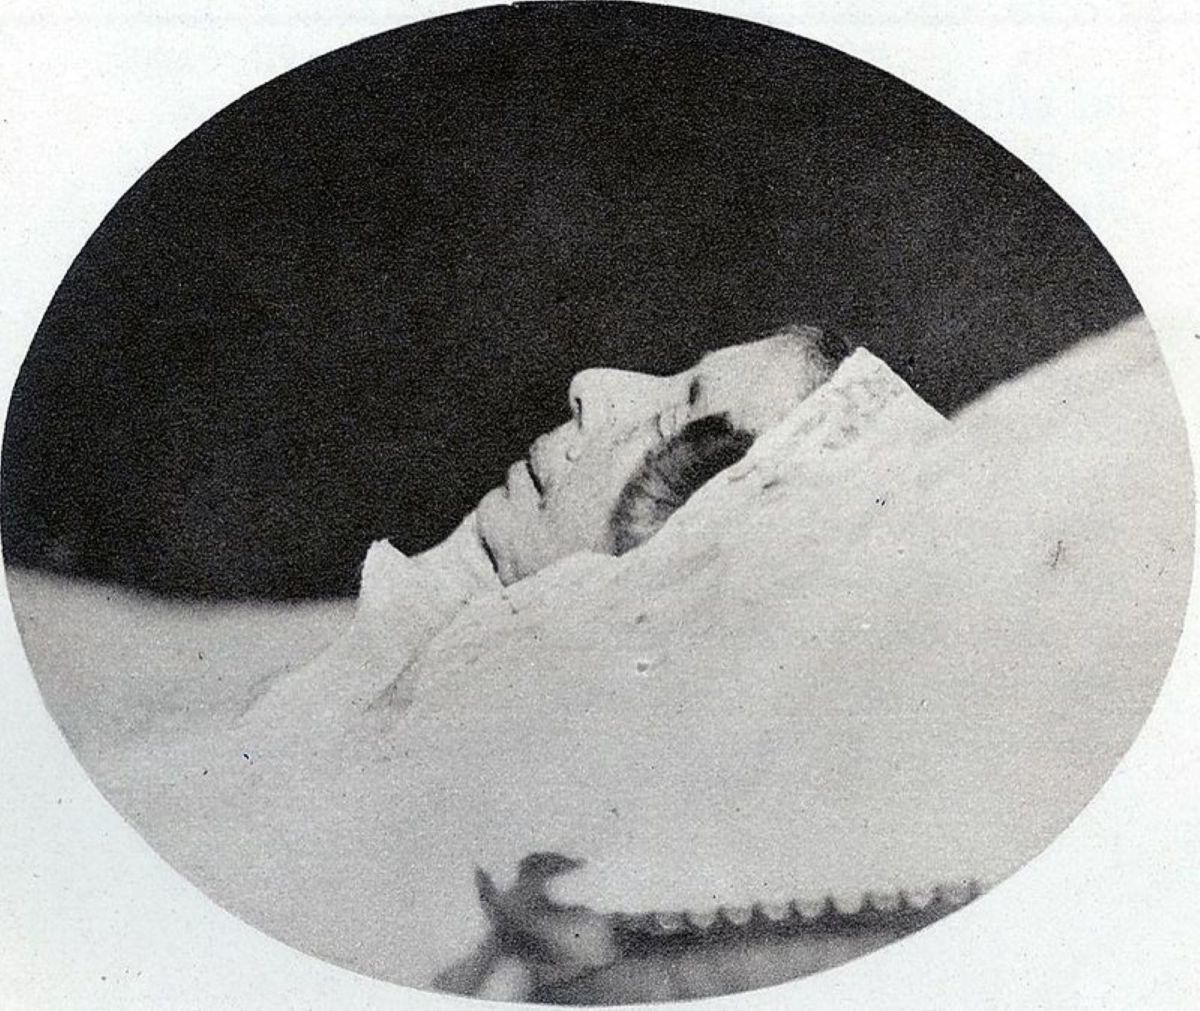 Desiree or Queen Desideria of Sweden and Norway on her deathbed December 1860.